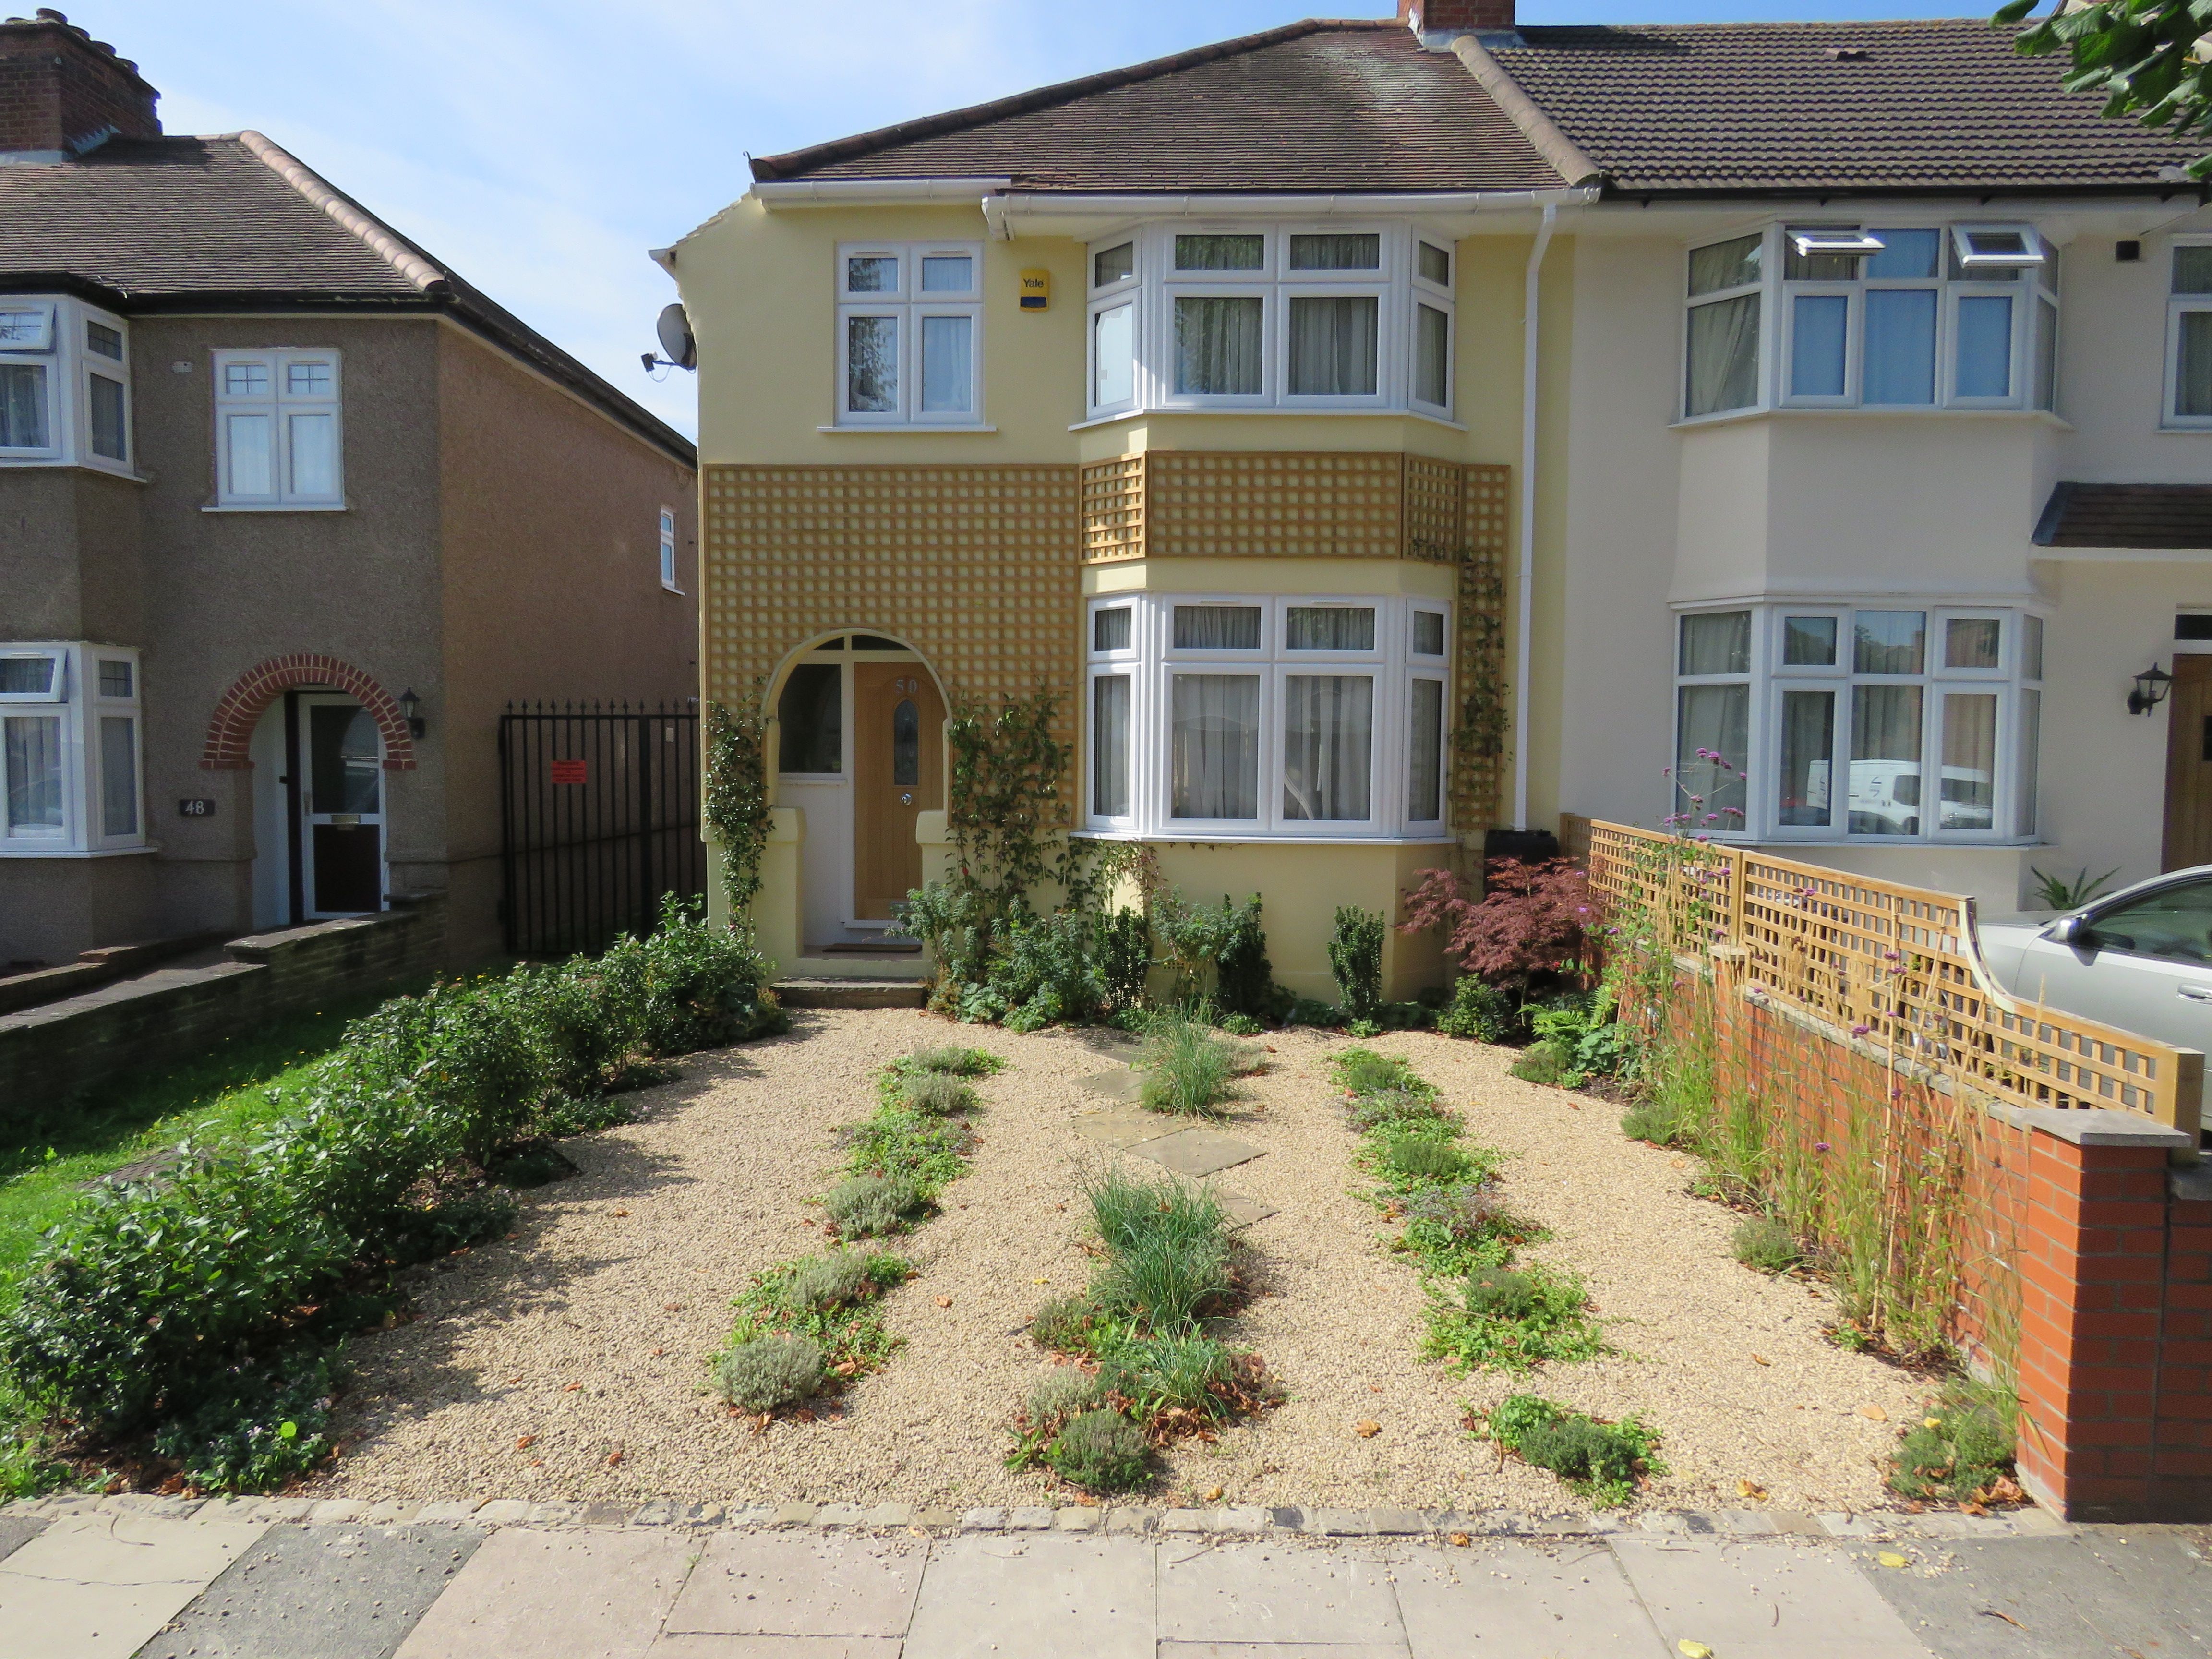 Photo of a depaved and restored front garden in Greenford with space for parking 2 cars on gravel, and plenty of plants.